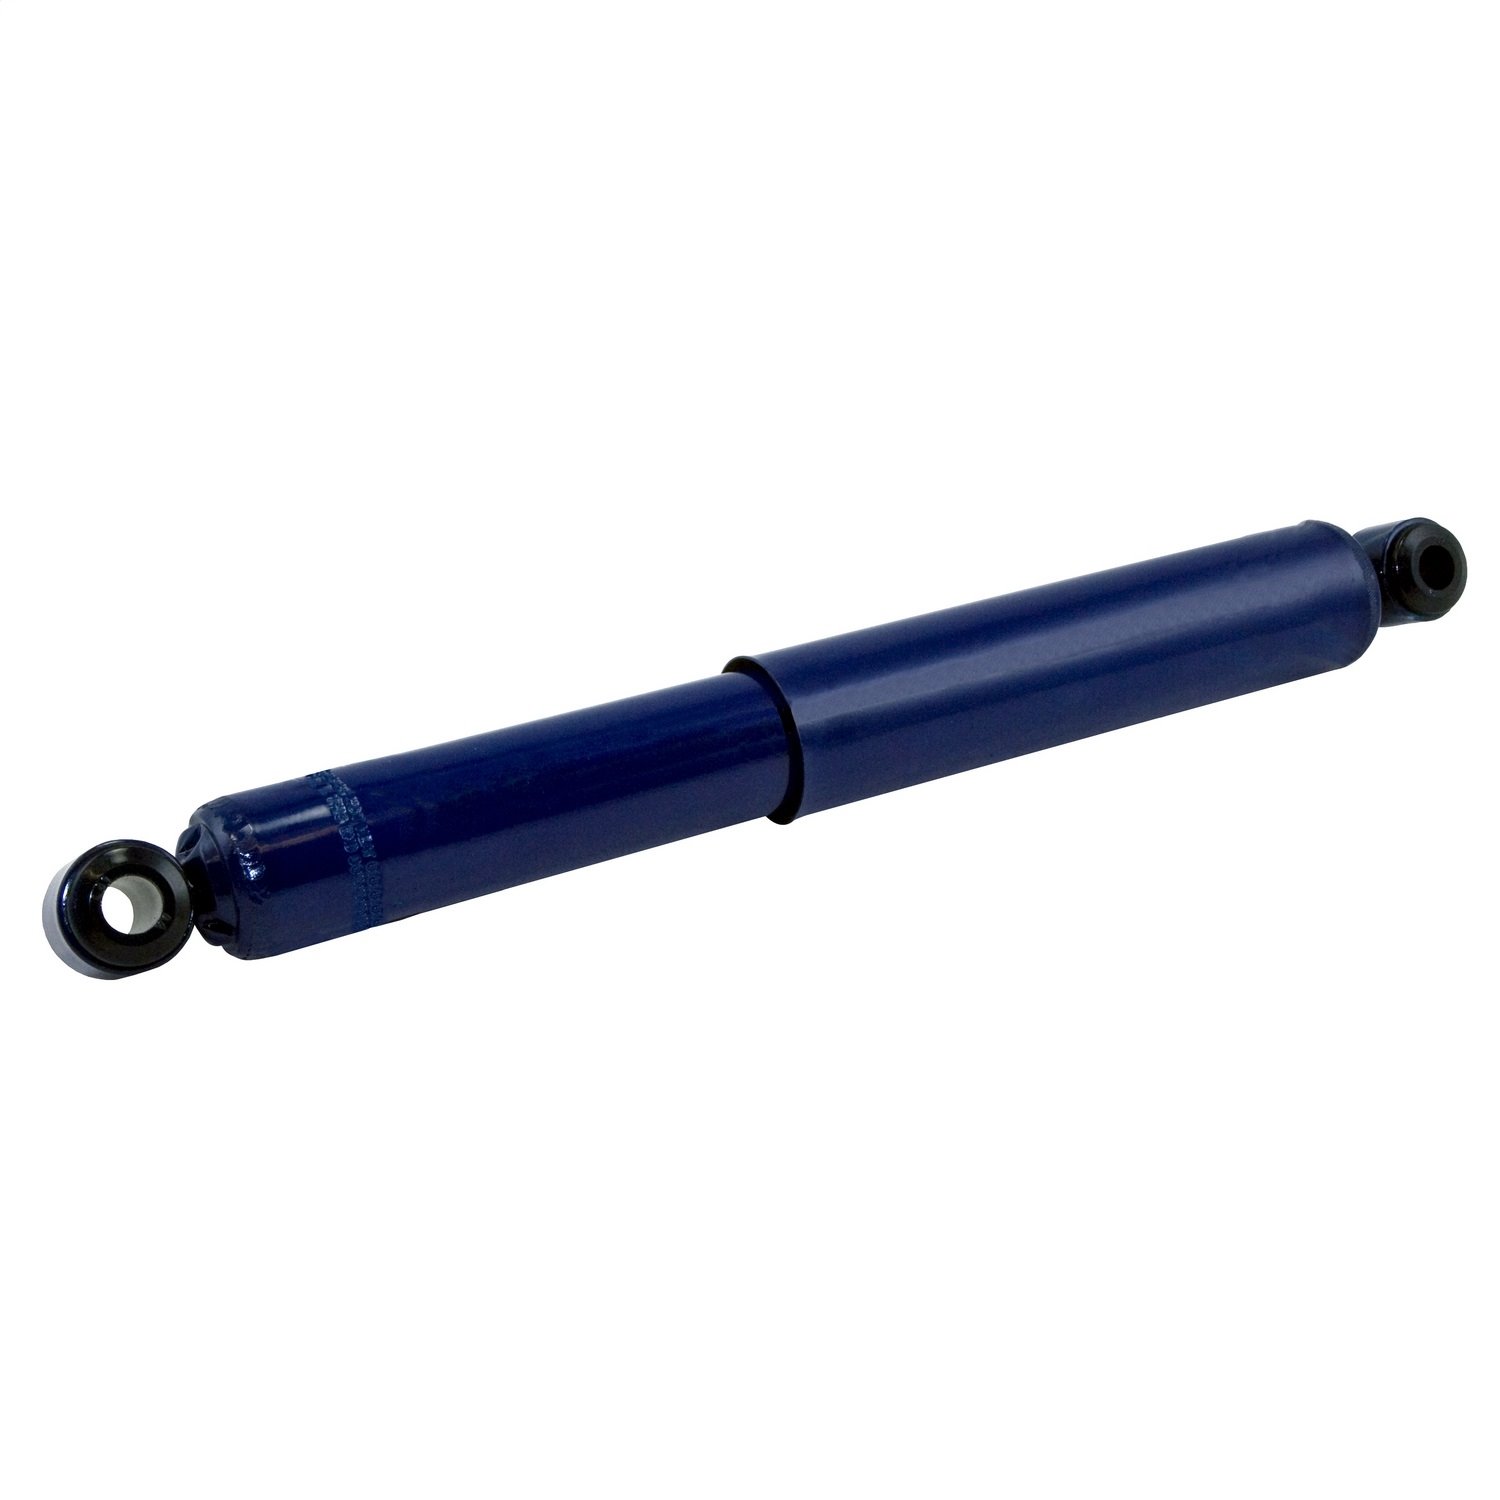 Heavy-duty replacement rear shock absorber from Omix-ADA, Fits